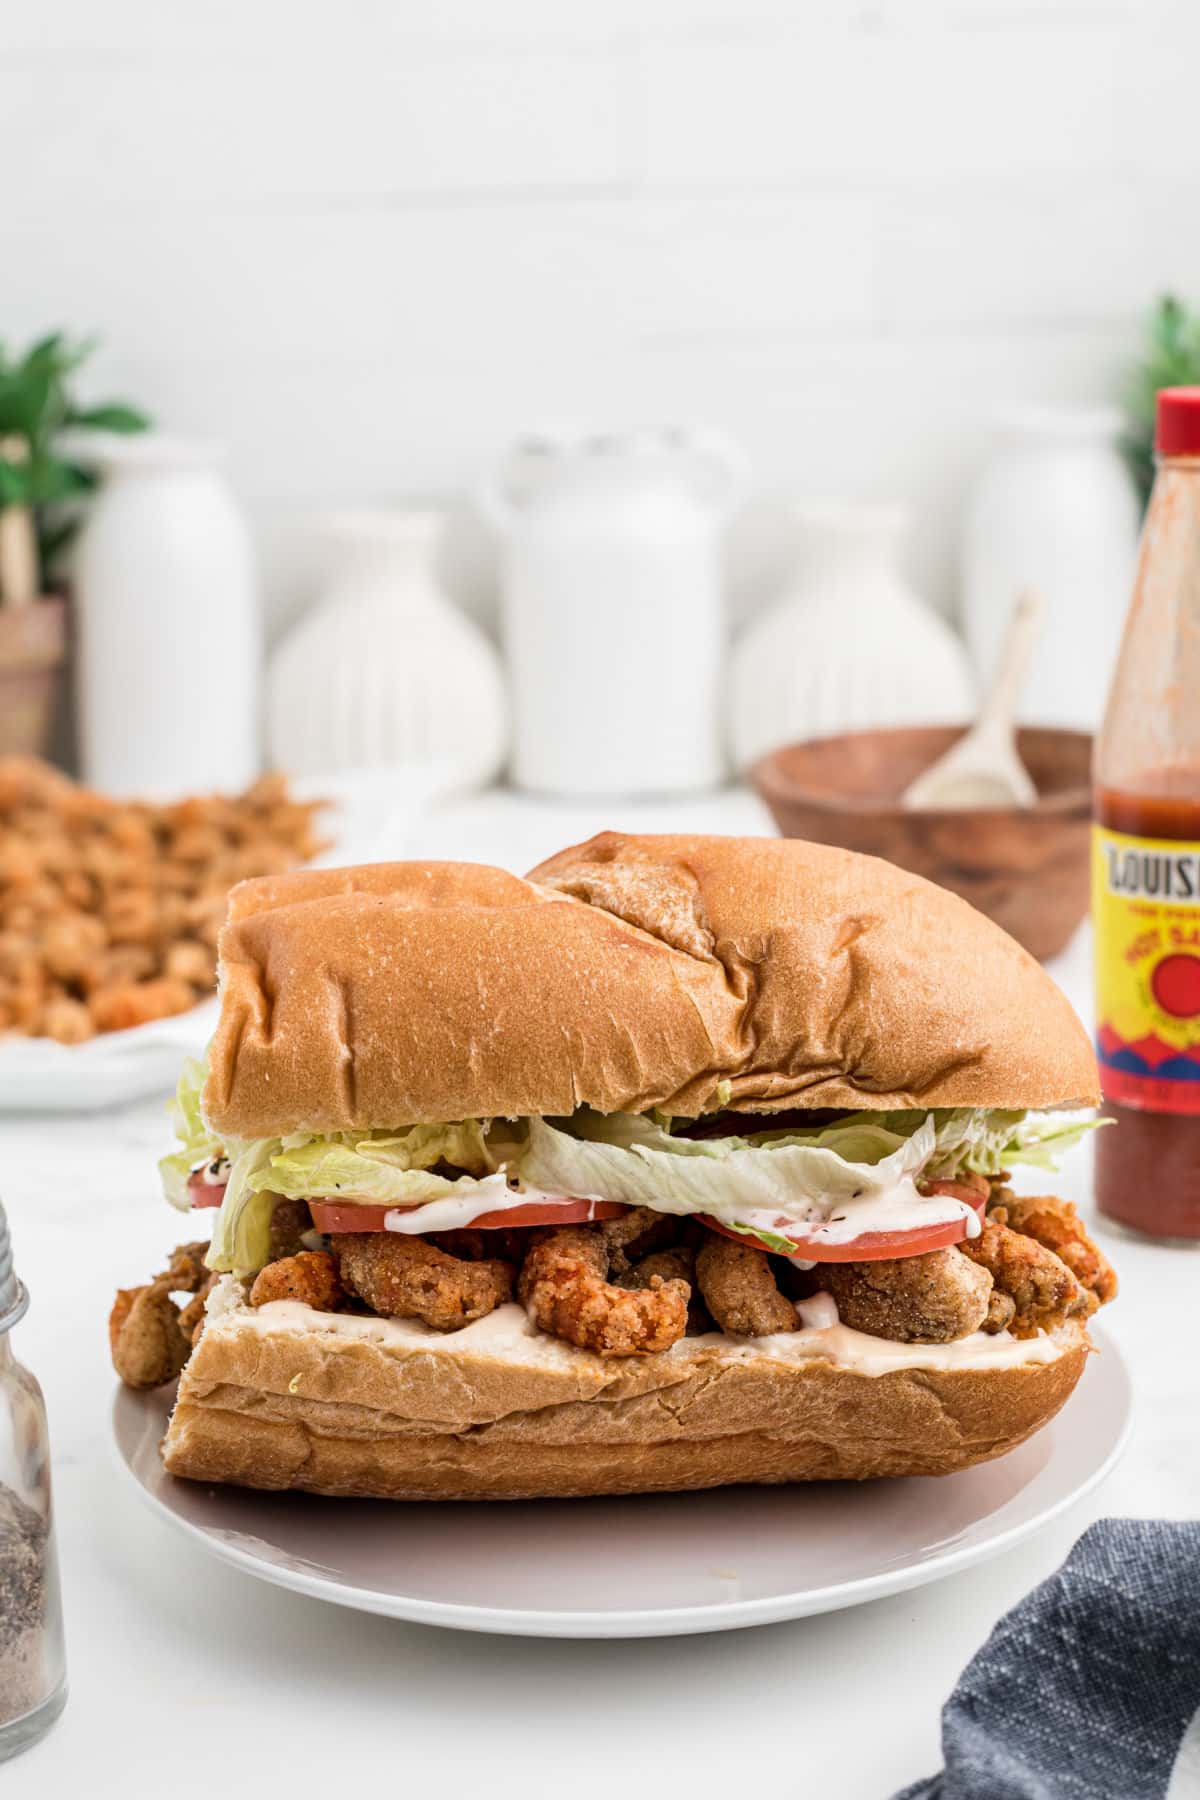 Side view of a closed dressed fried crawfish poboy.